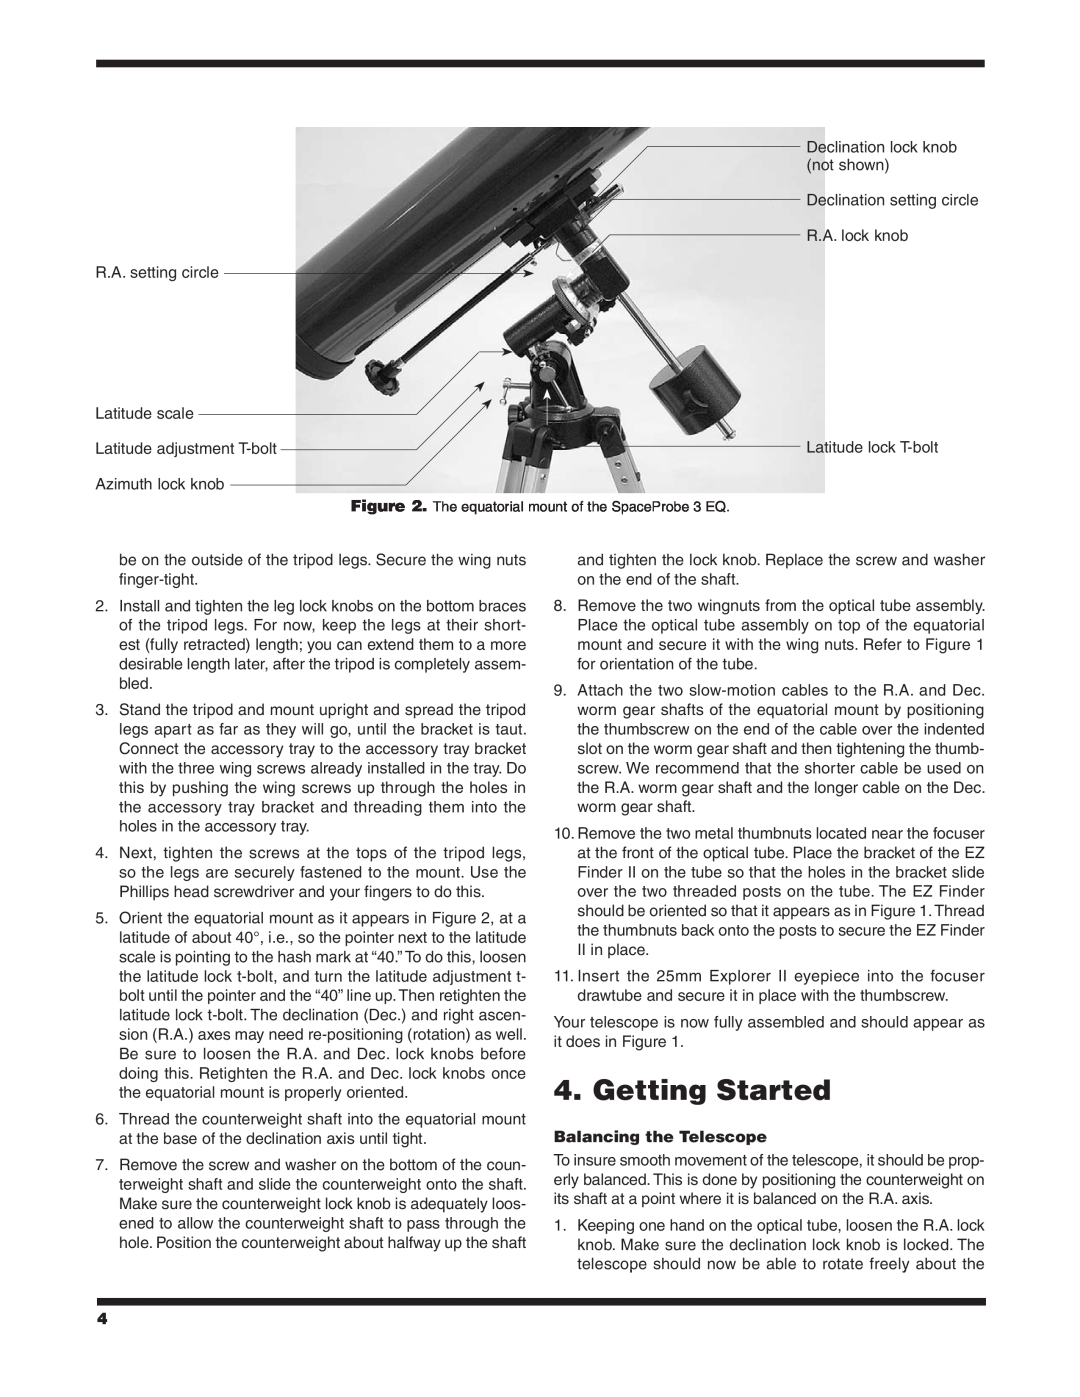 Orion 9843 instruction manual Getting Started, Balancing the Telescope 